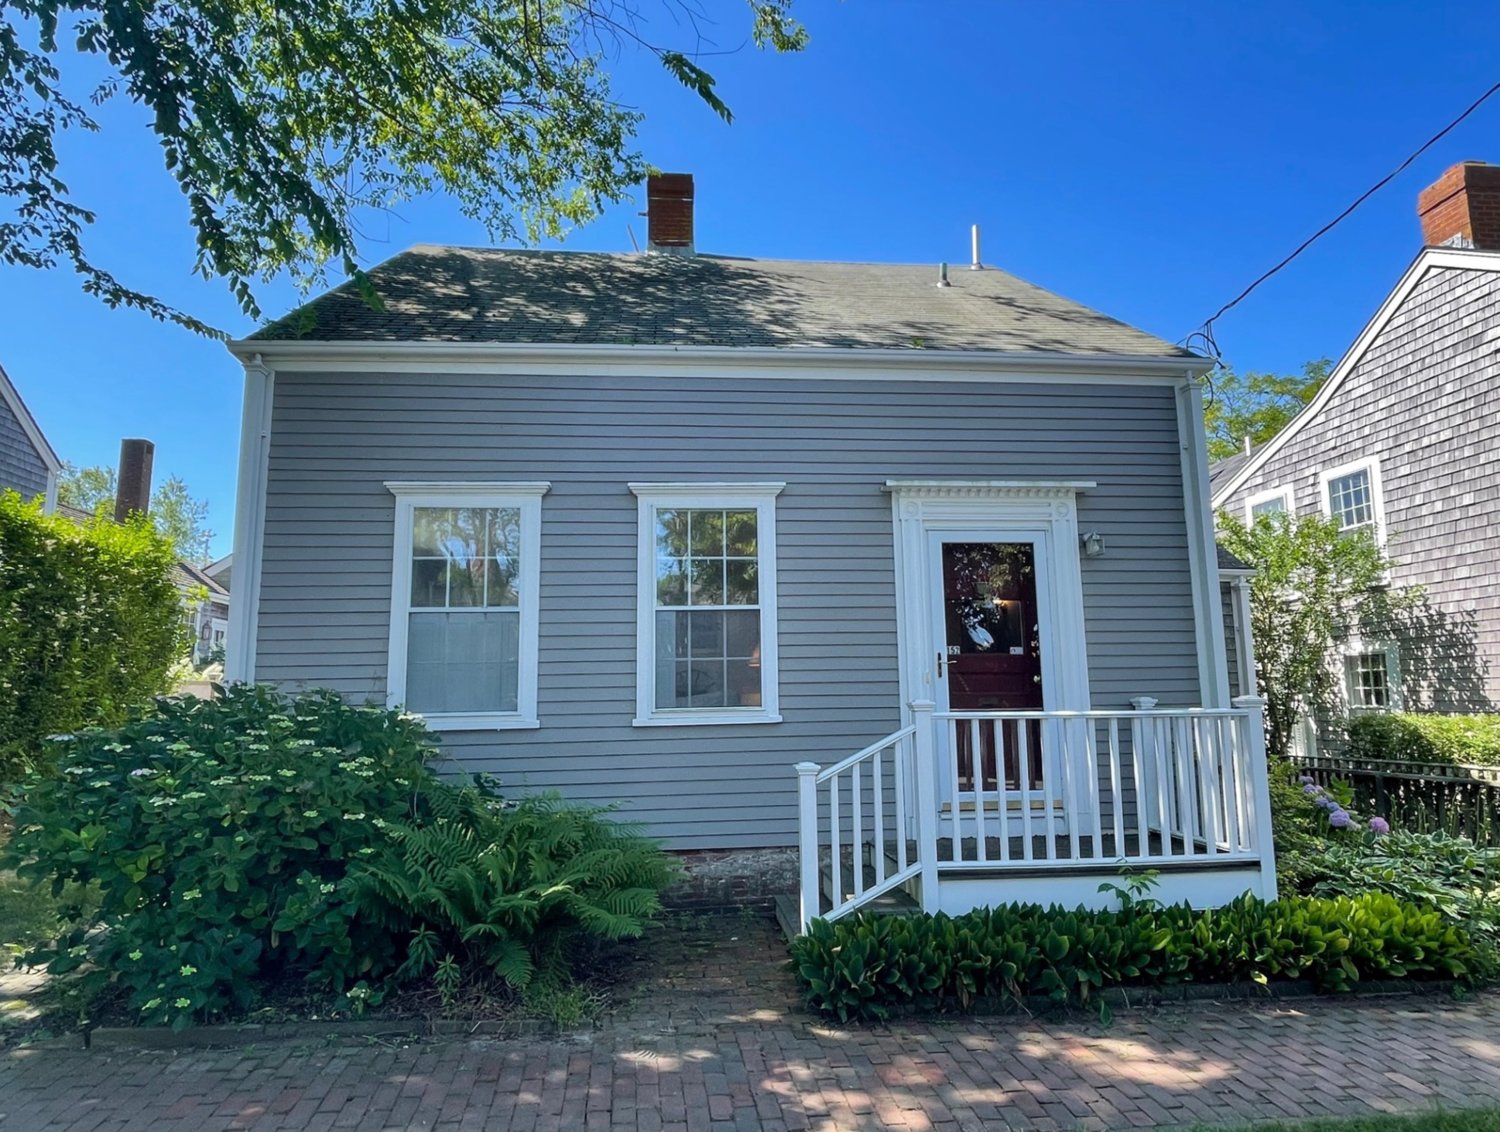 Located at the top of picturesque Main Street, this five-bedroom, two-bathroom home has frontage on two streets and takes advantage of all that the town has to offer.